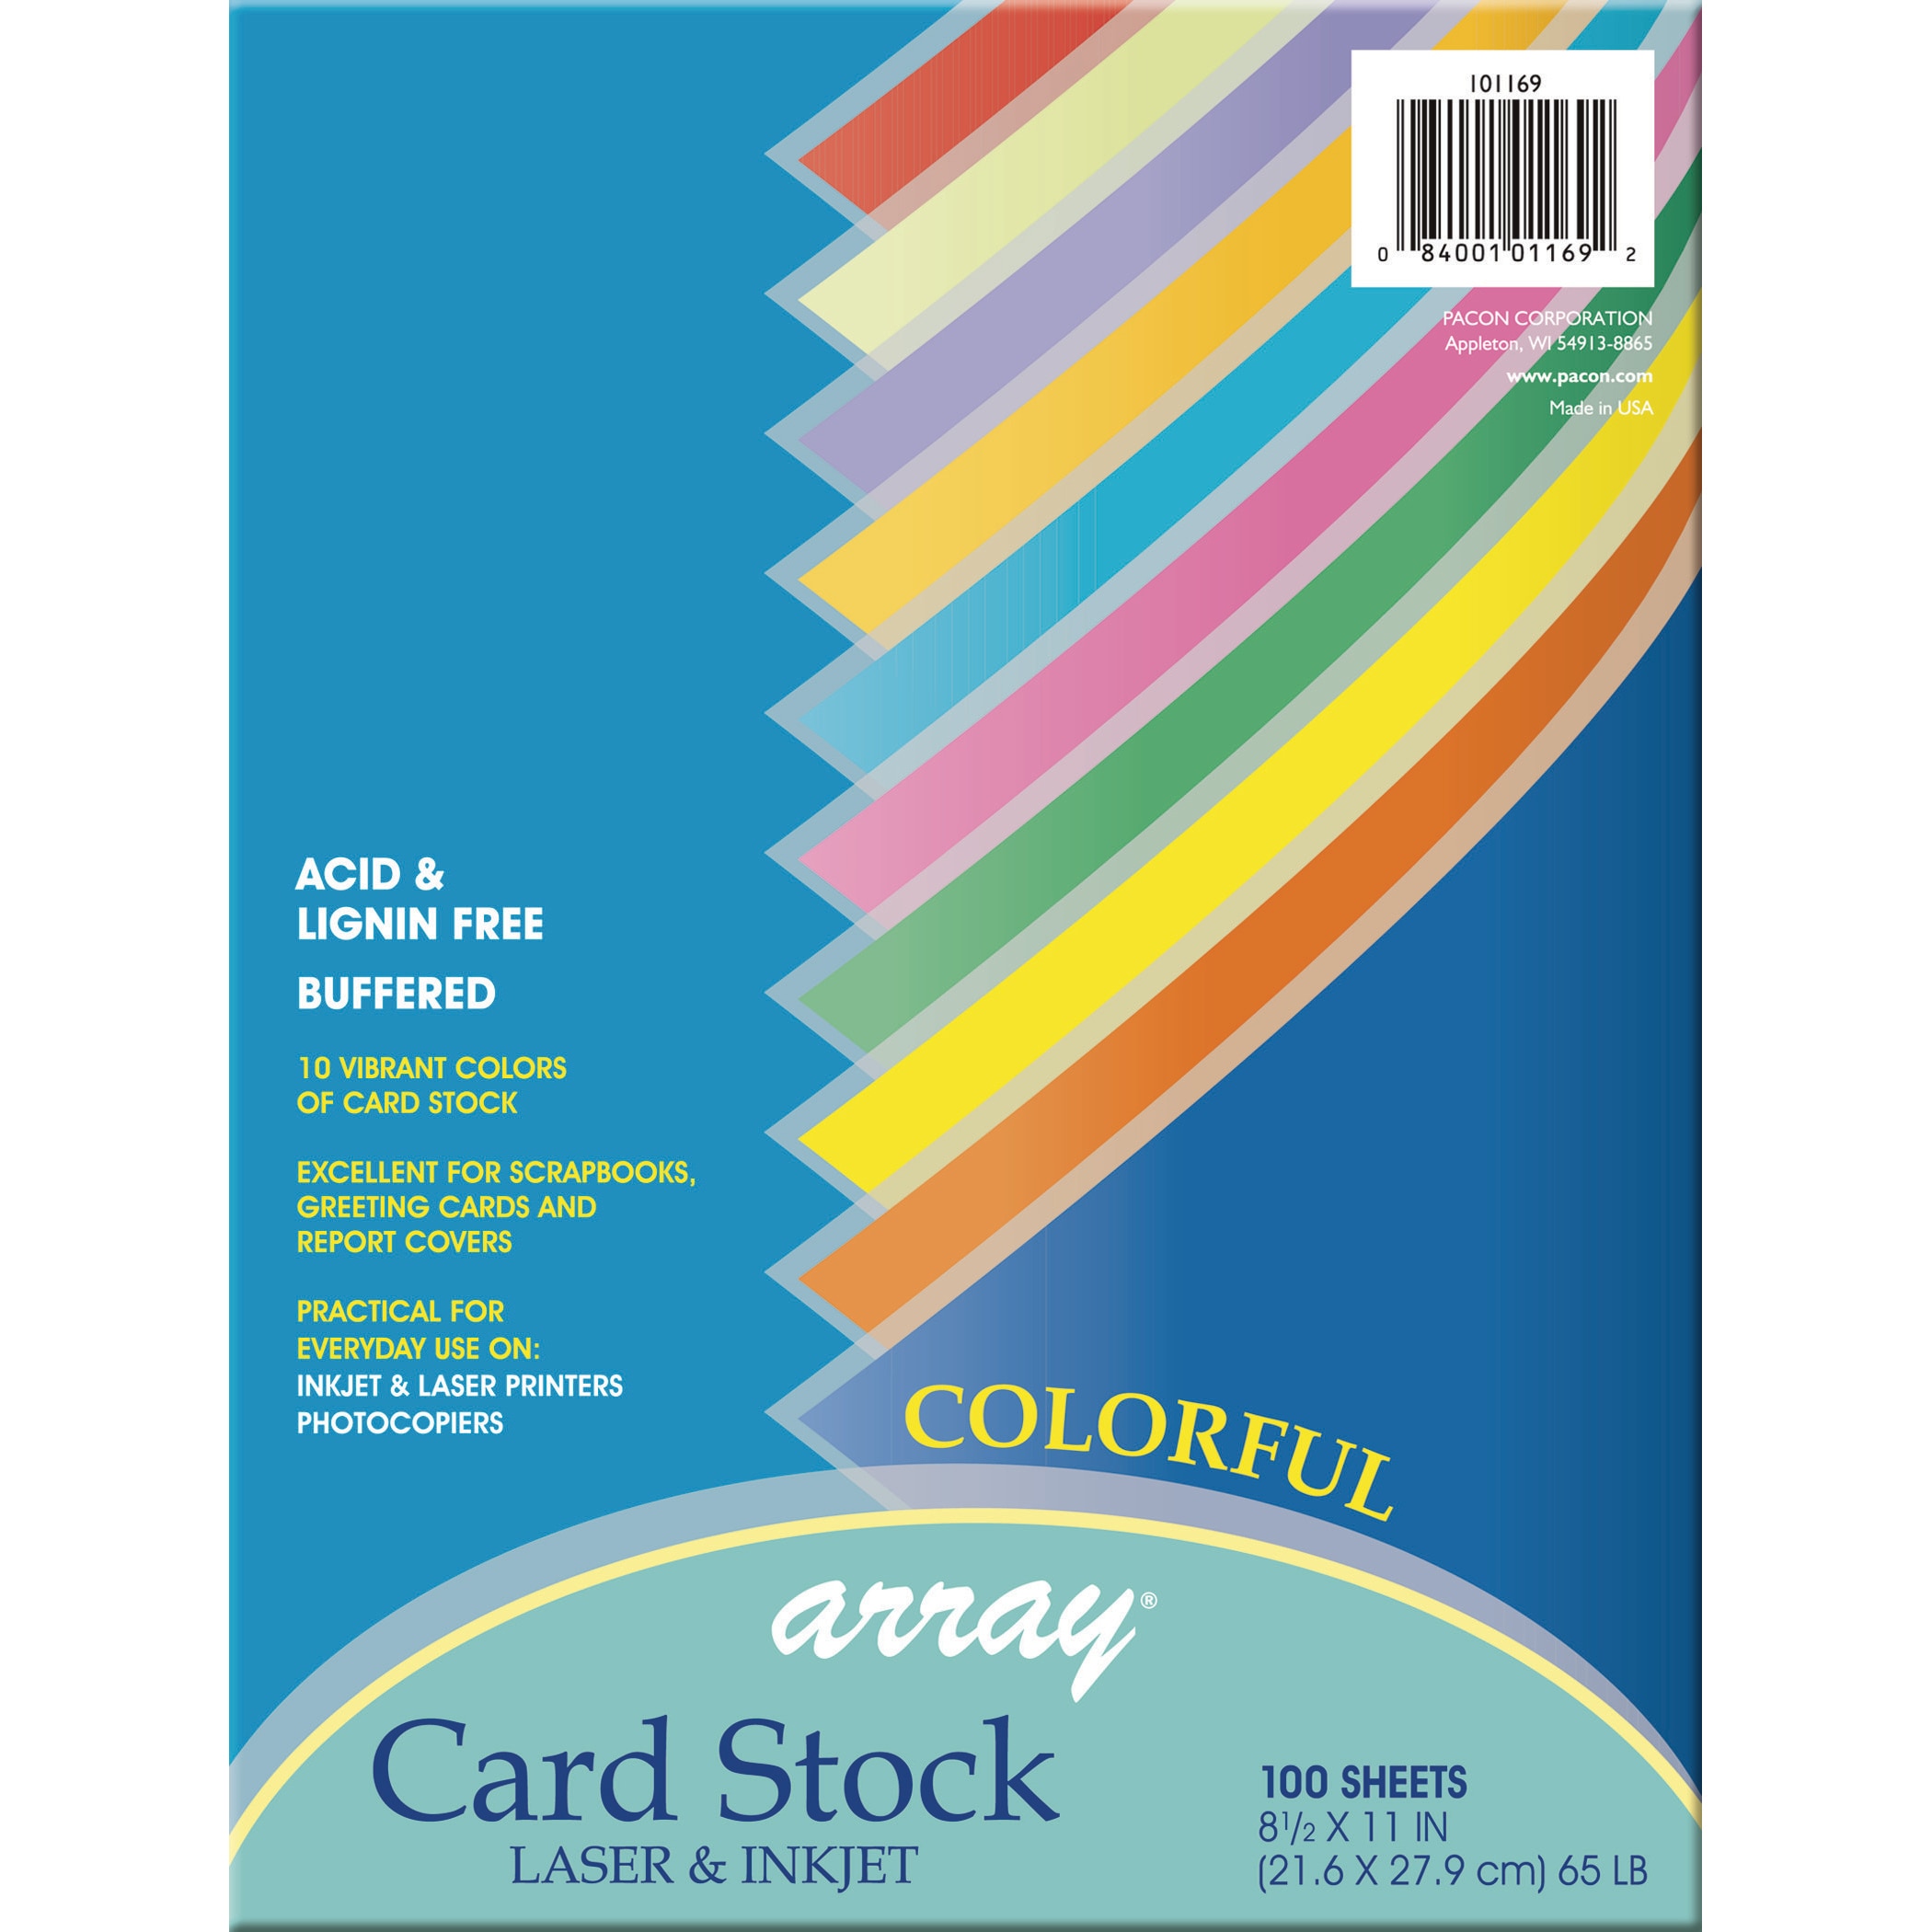 Pacon Card Stock, 100 Sheets, 8.5" x 11", Assorted Colors